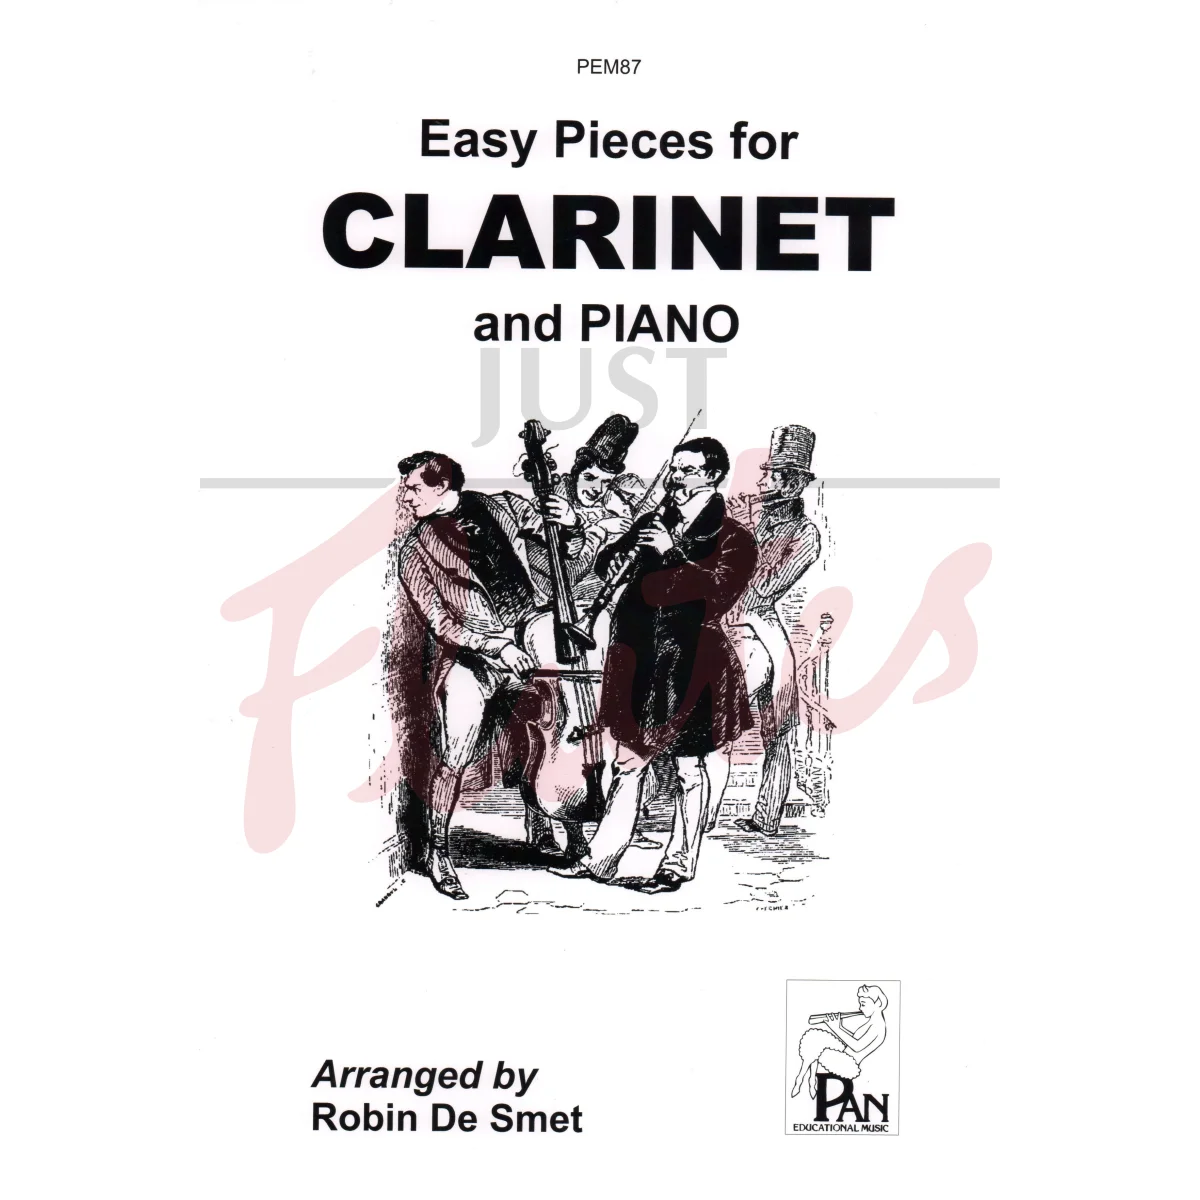 Easy Pieces for Clarinet and Piano